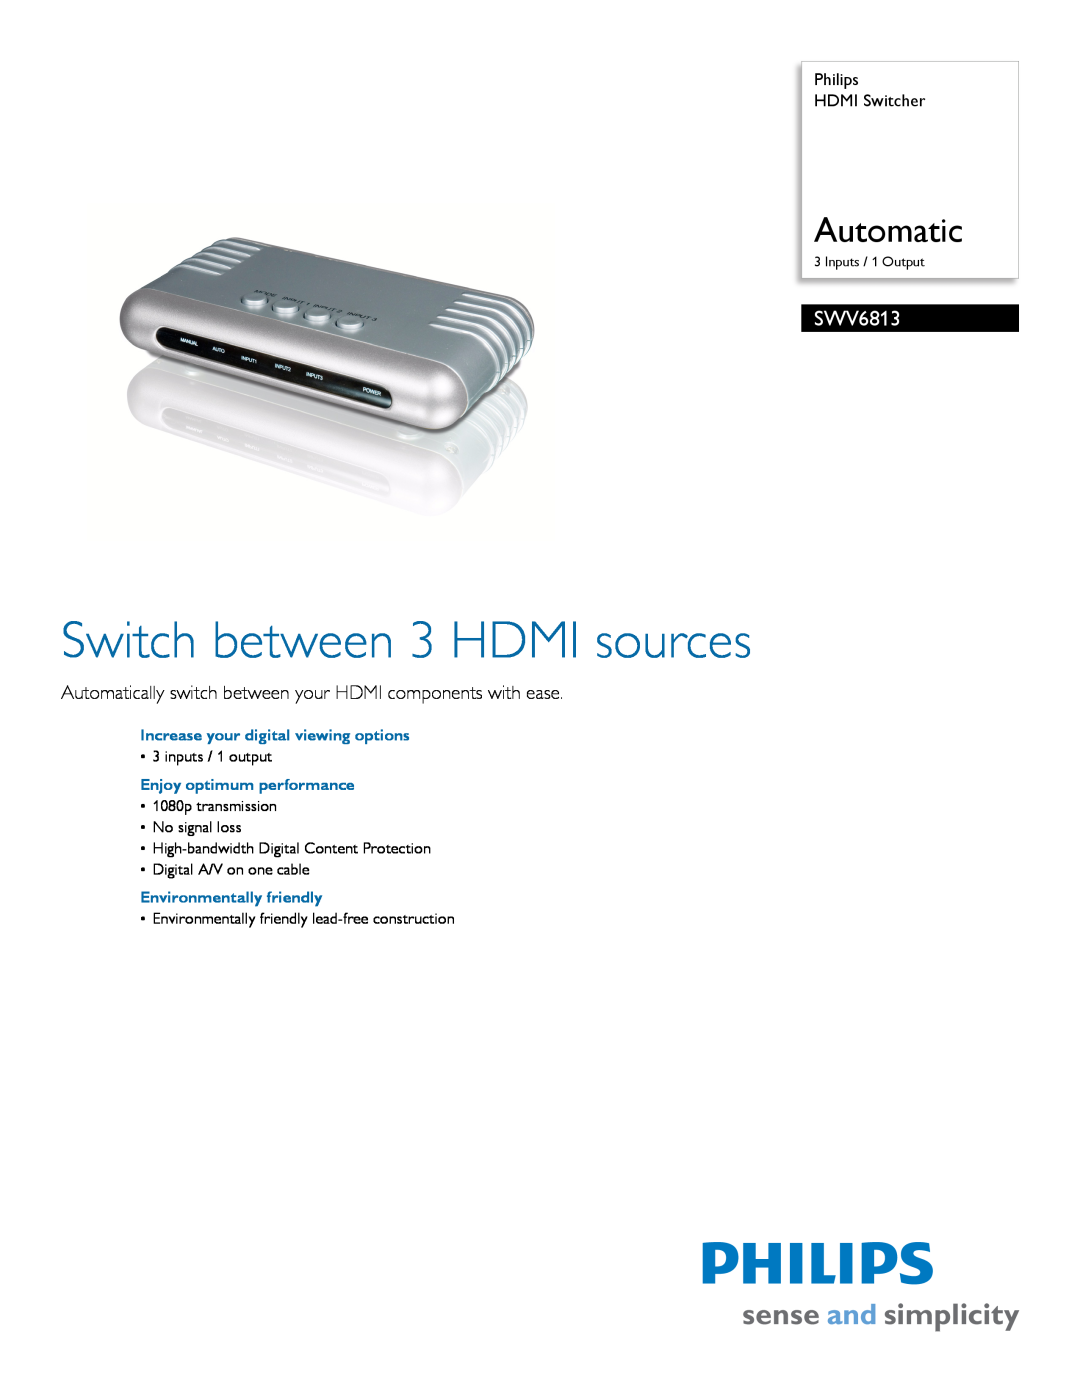 Philips SWV6813/37 manual Philips HDMI Switcher, Increase your digital viewing options, Enjoy optimum performance 